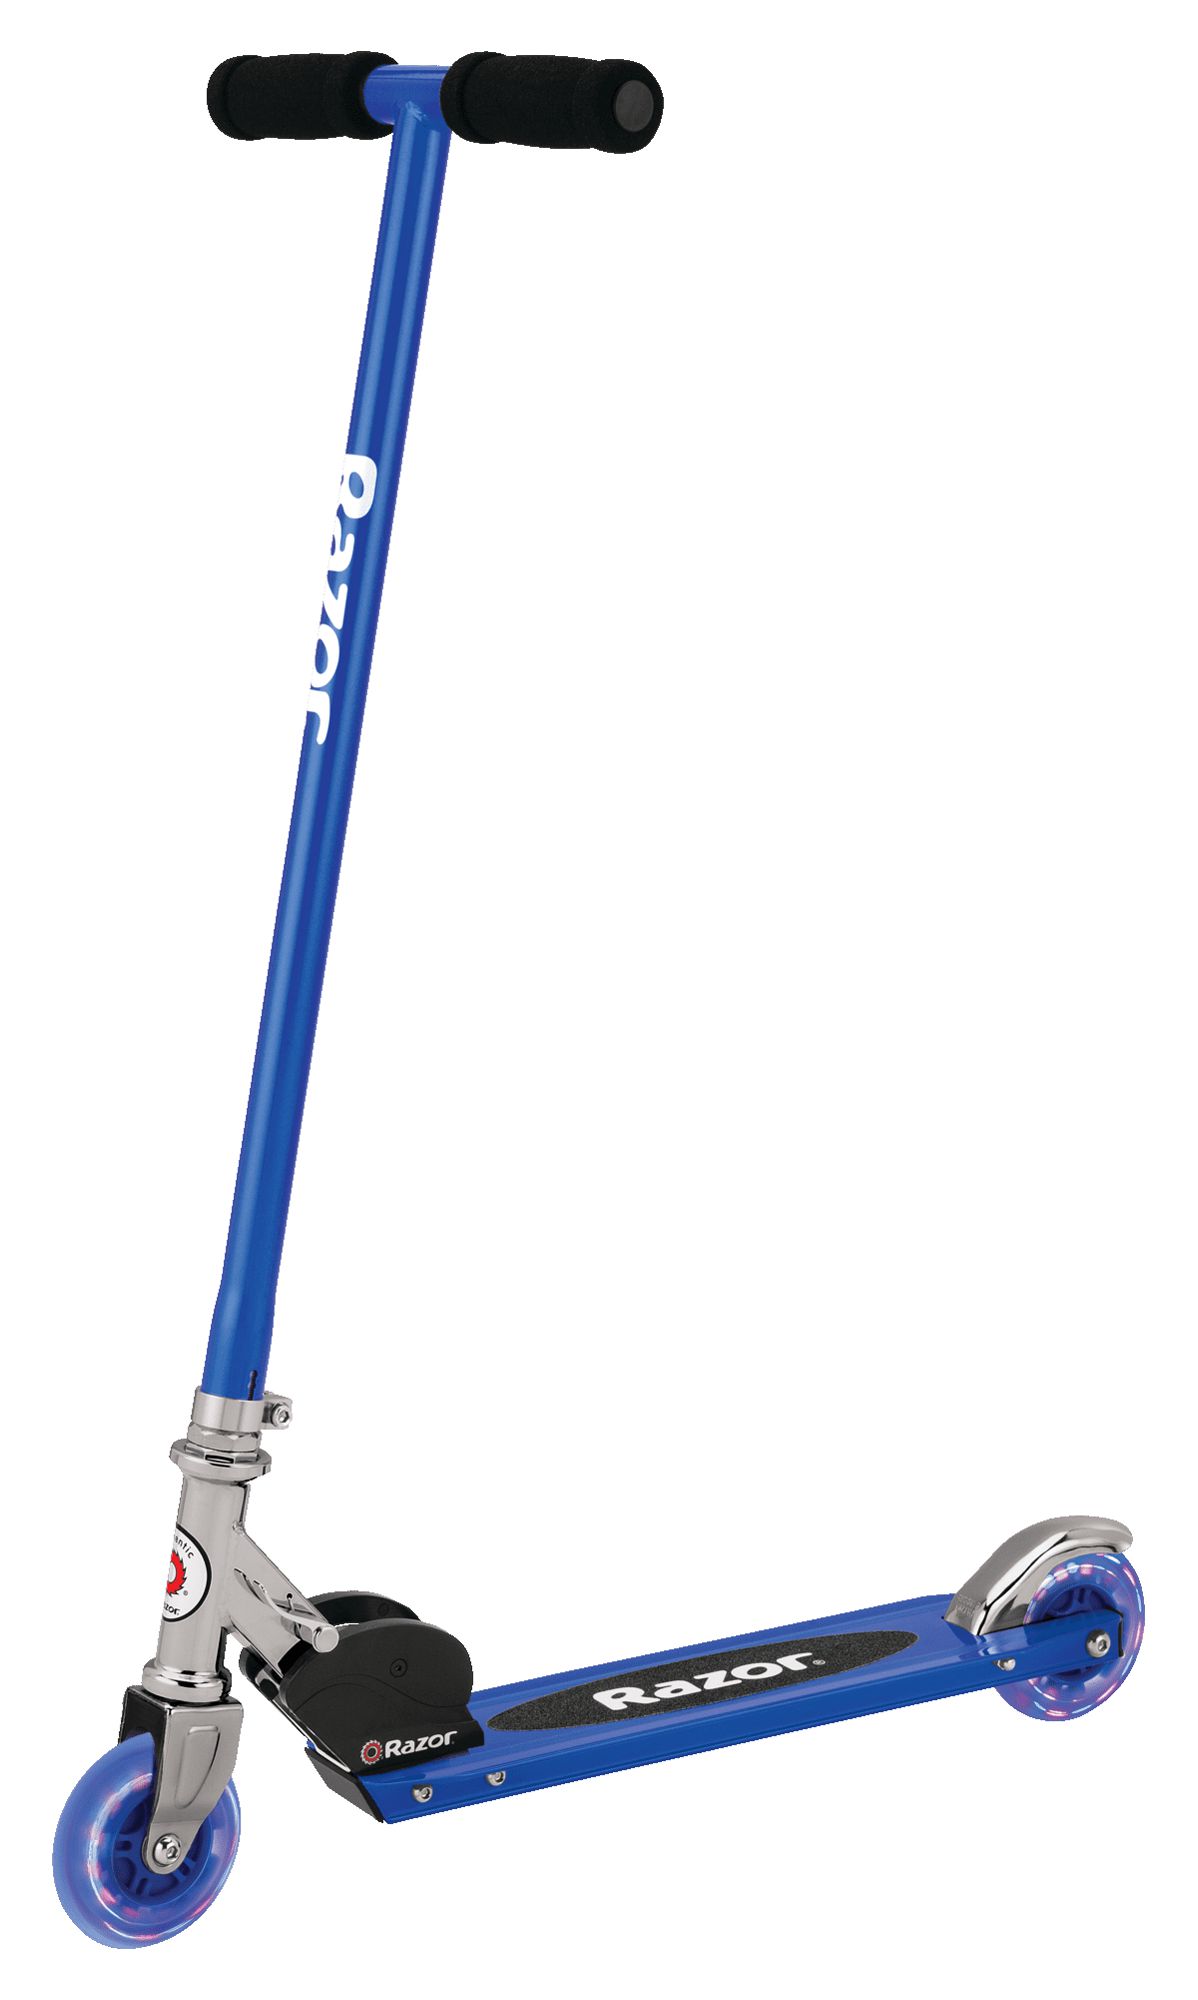 Razor S Folding Kick Scooter with Light-Up Wheel - Blue, for Kids Ages 5+ and up to 110 lbs - image 1 of 10